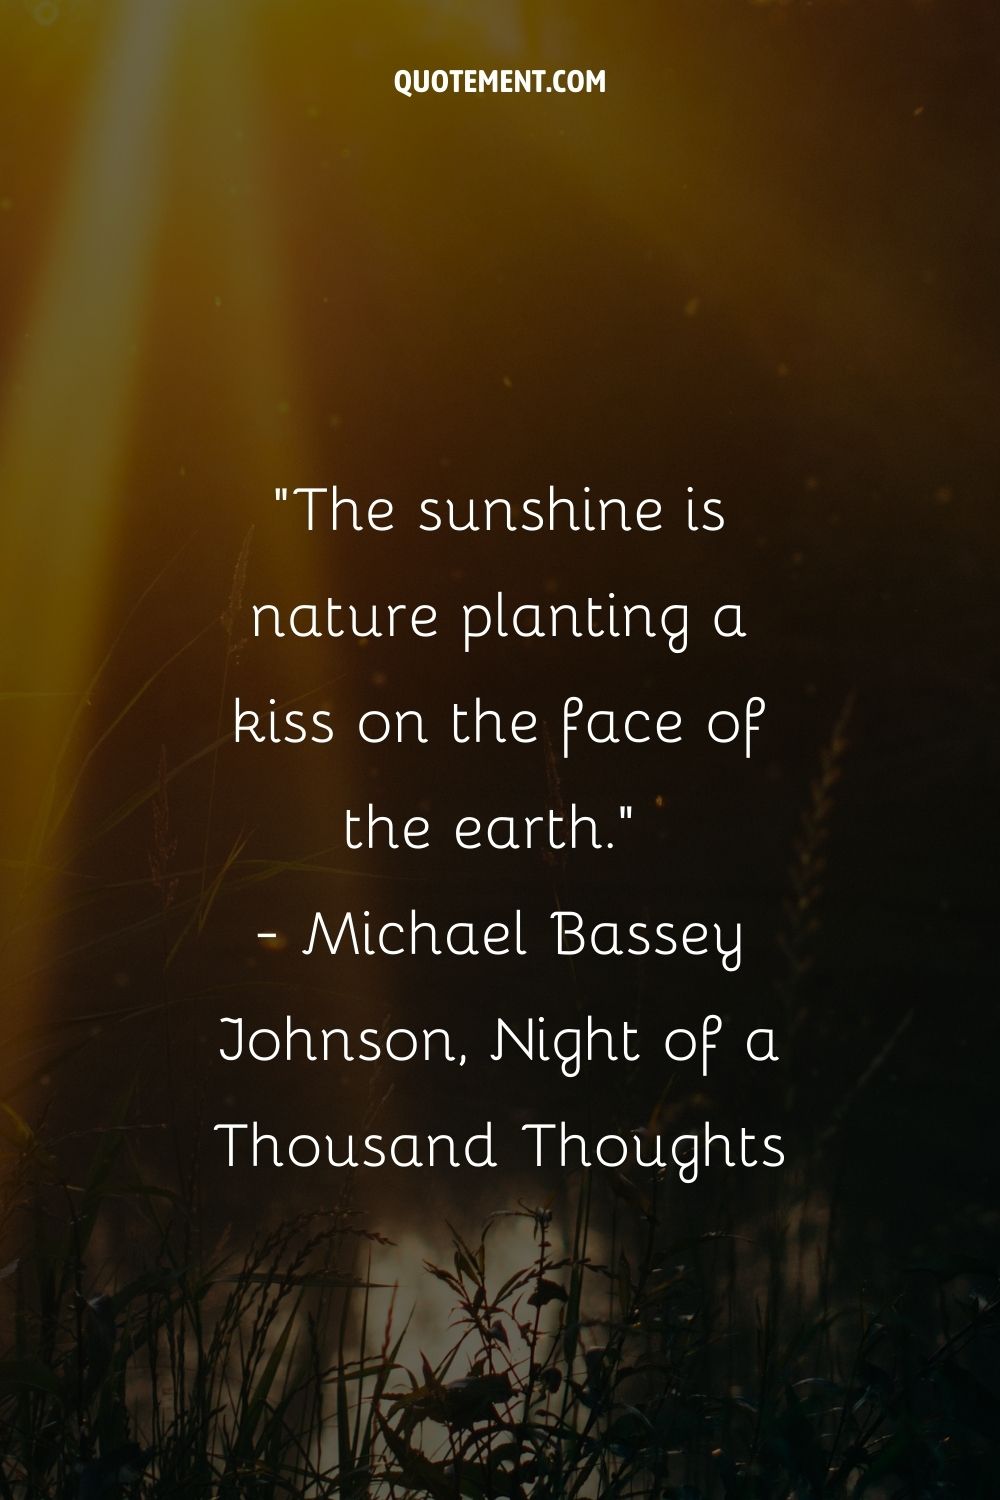 The sunshine is nature planting a kiss on the face of the earth